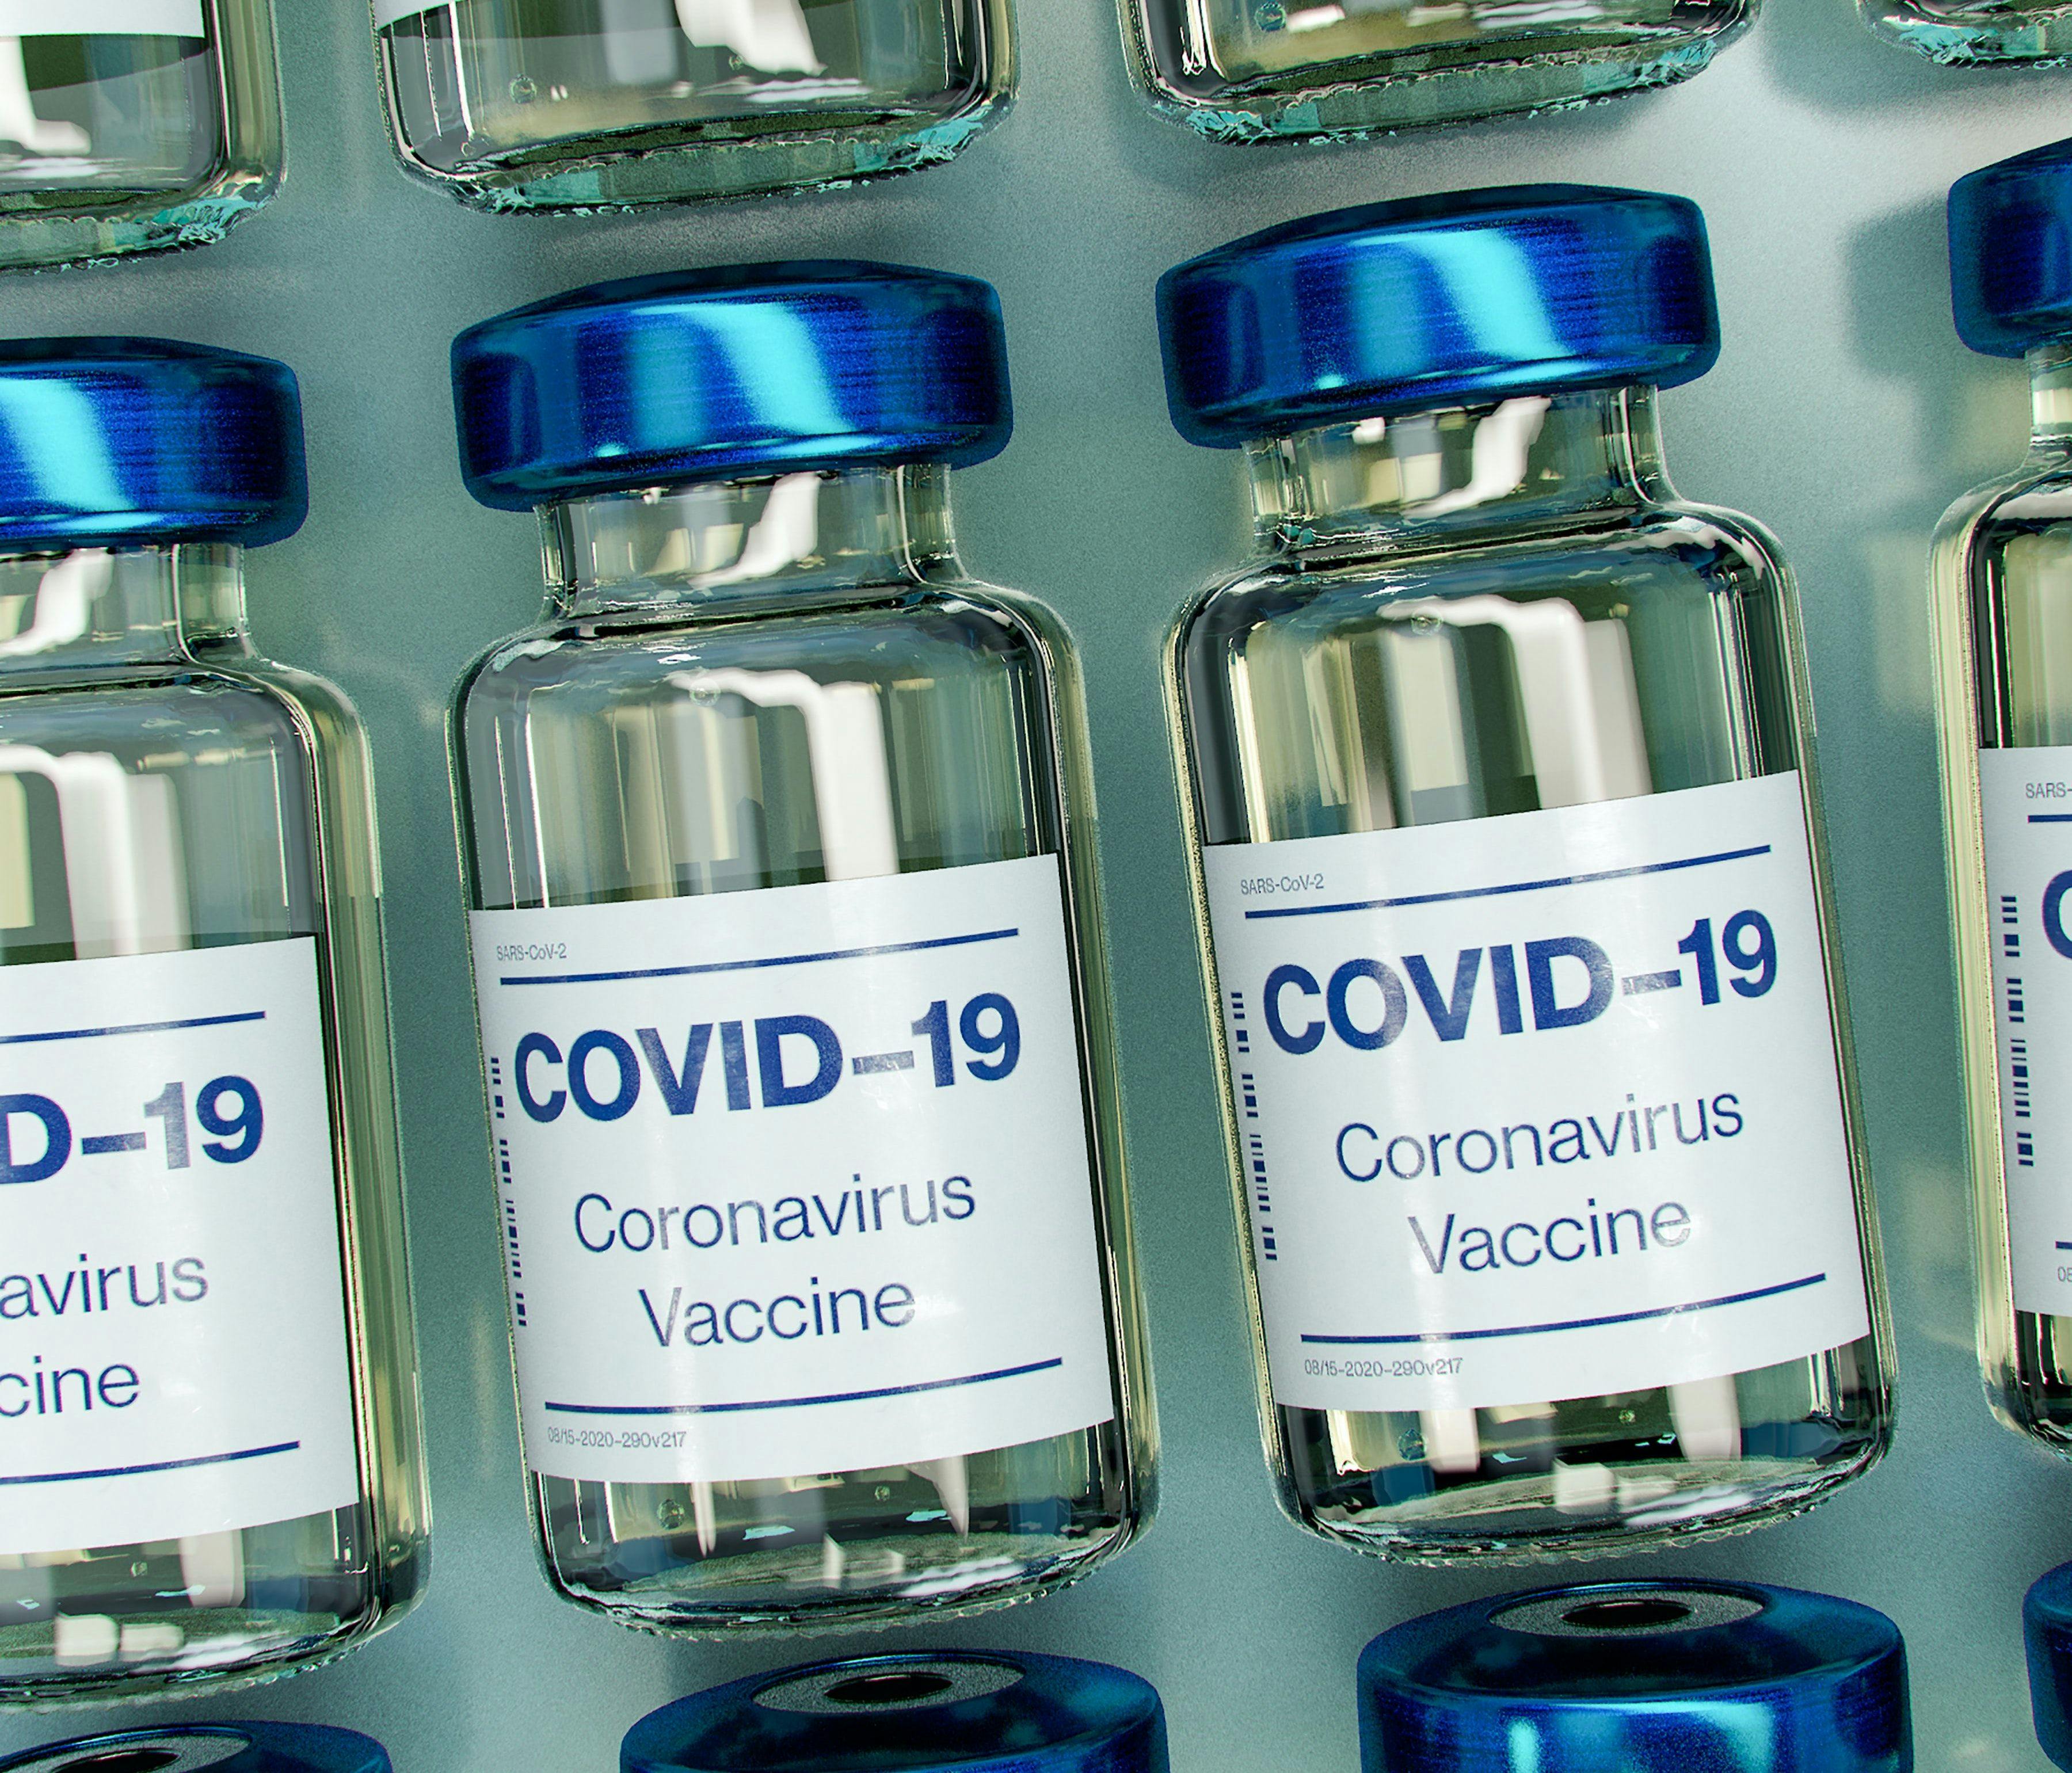 BioNTech Executive Expresses Hope for Vaccine Versus New COVID-19 Strain